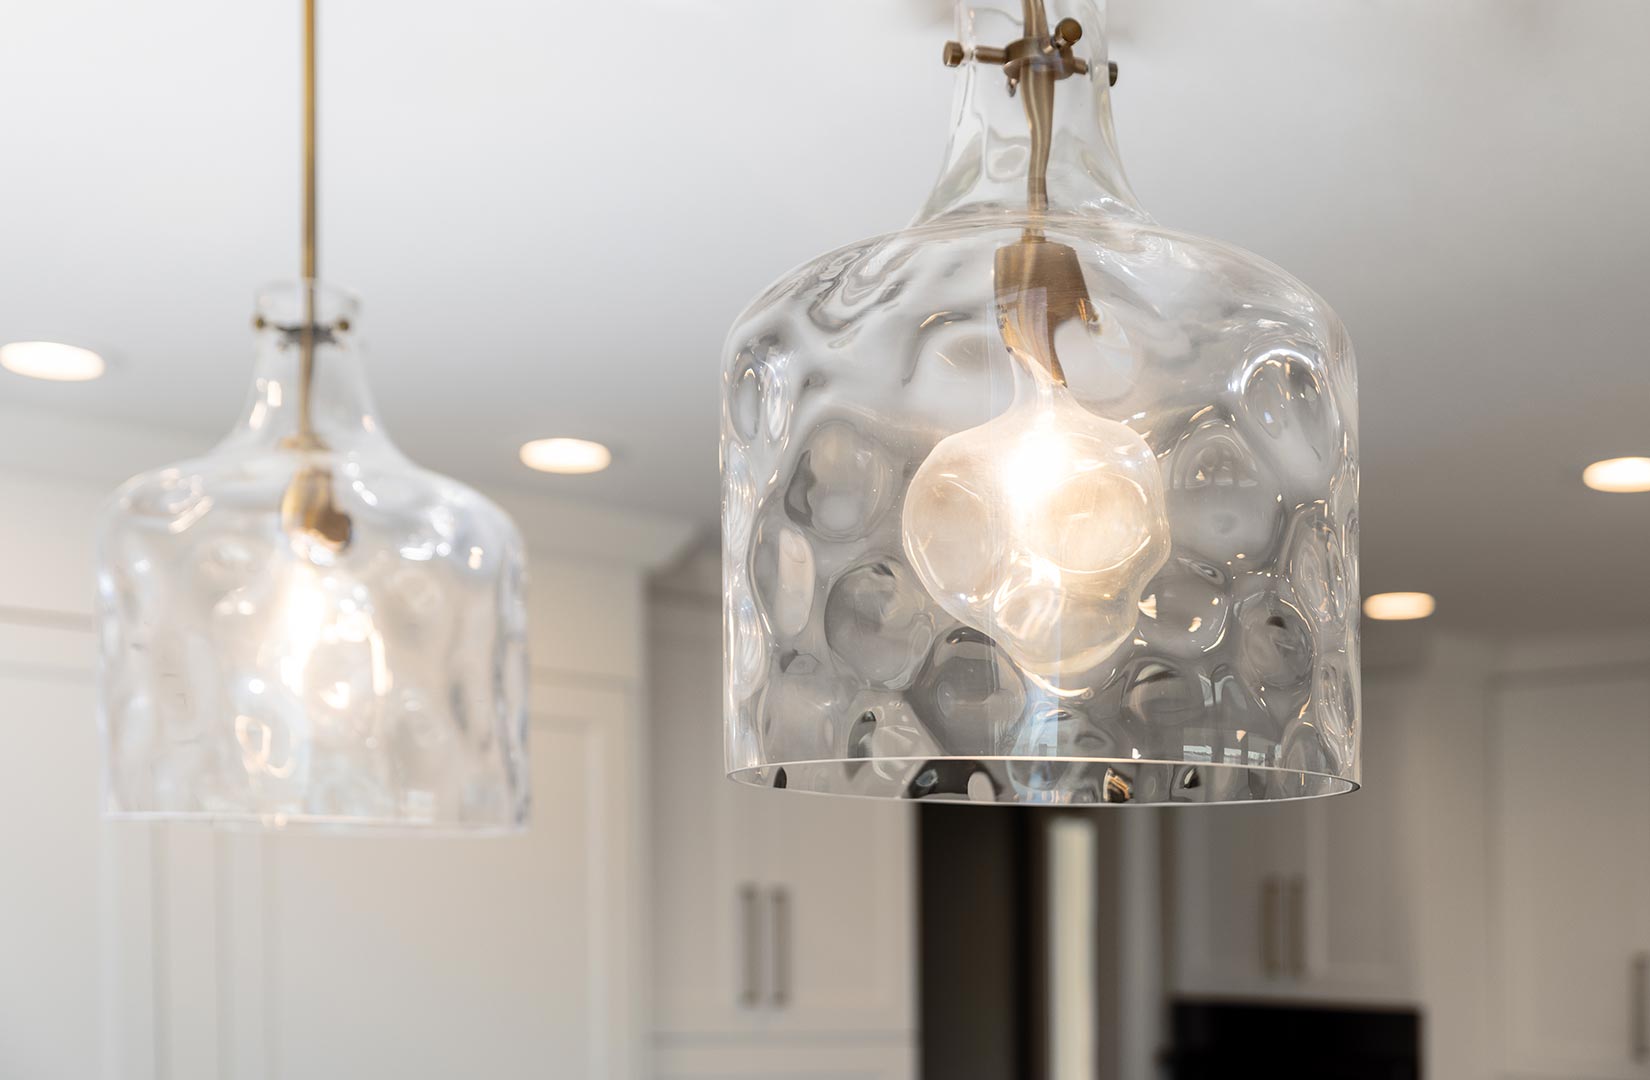 Modern light fixtures used in Freestone Design-Build's Janna drive project